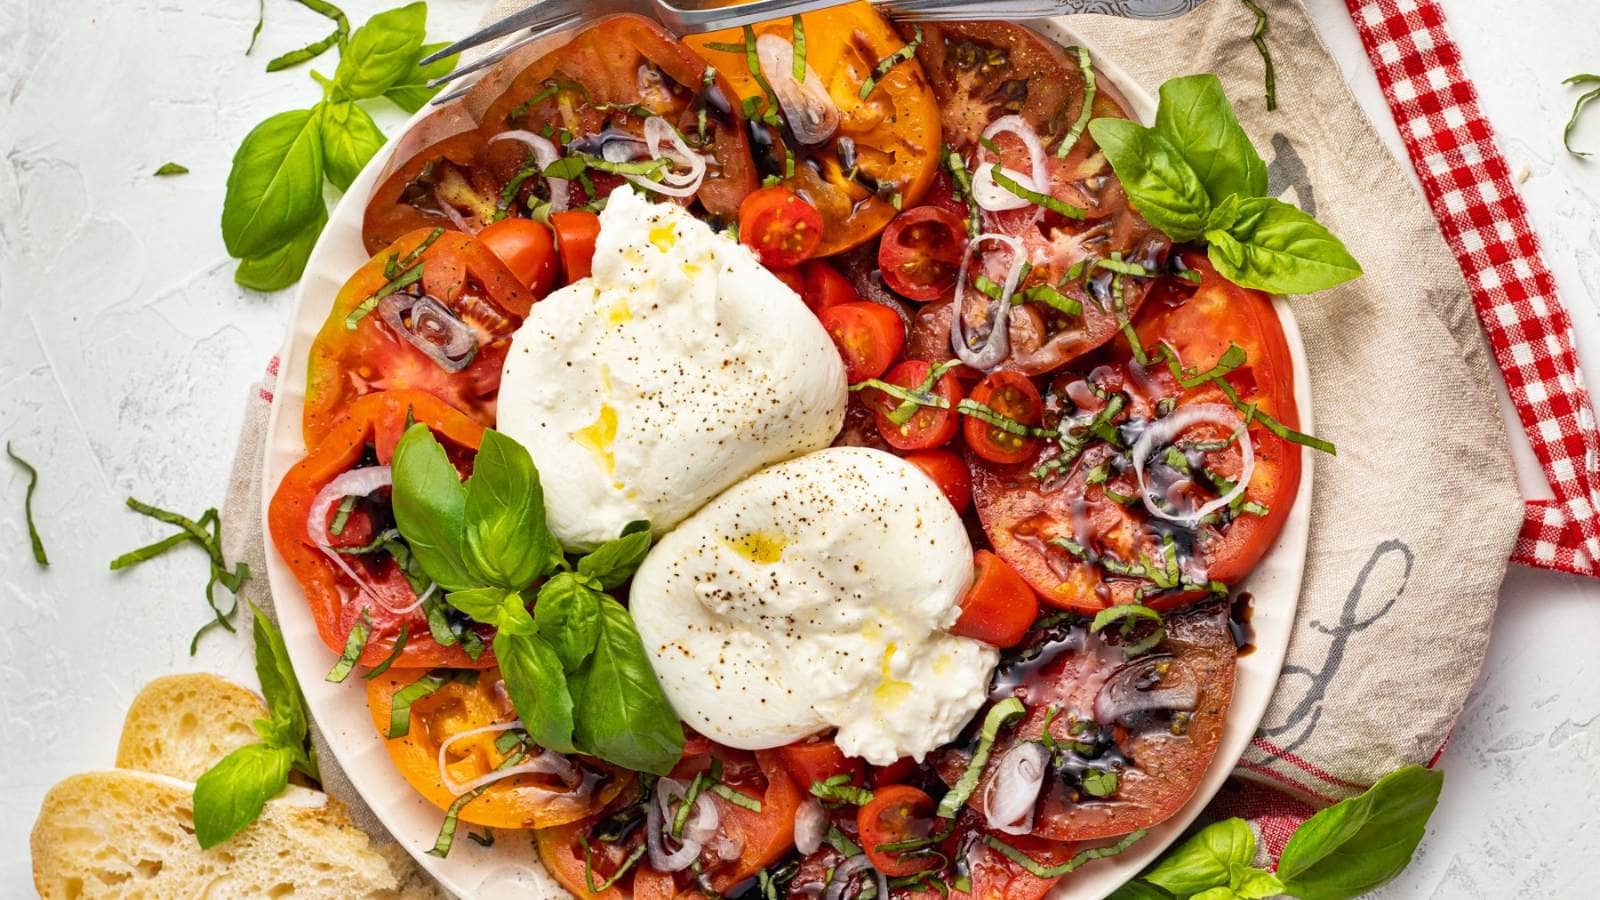 Burrata Caprese recipe by Sprinkled With Balance.